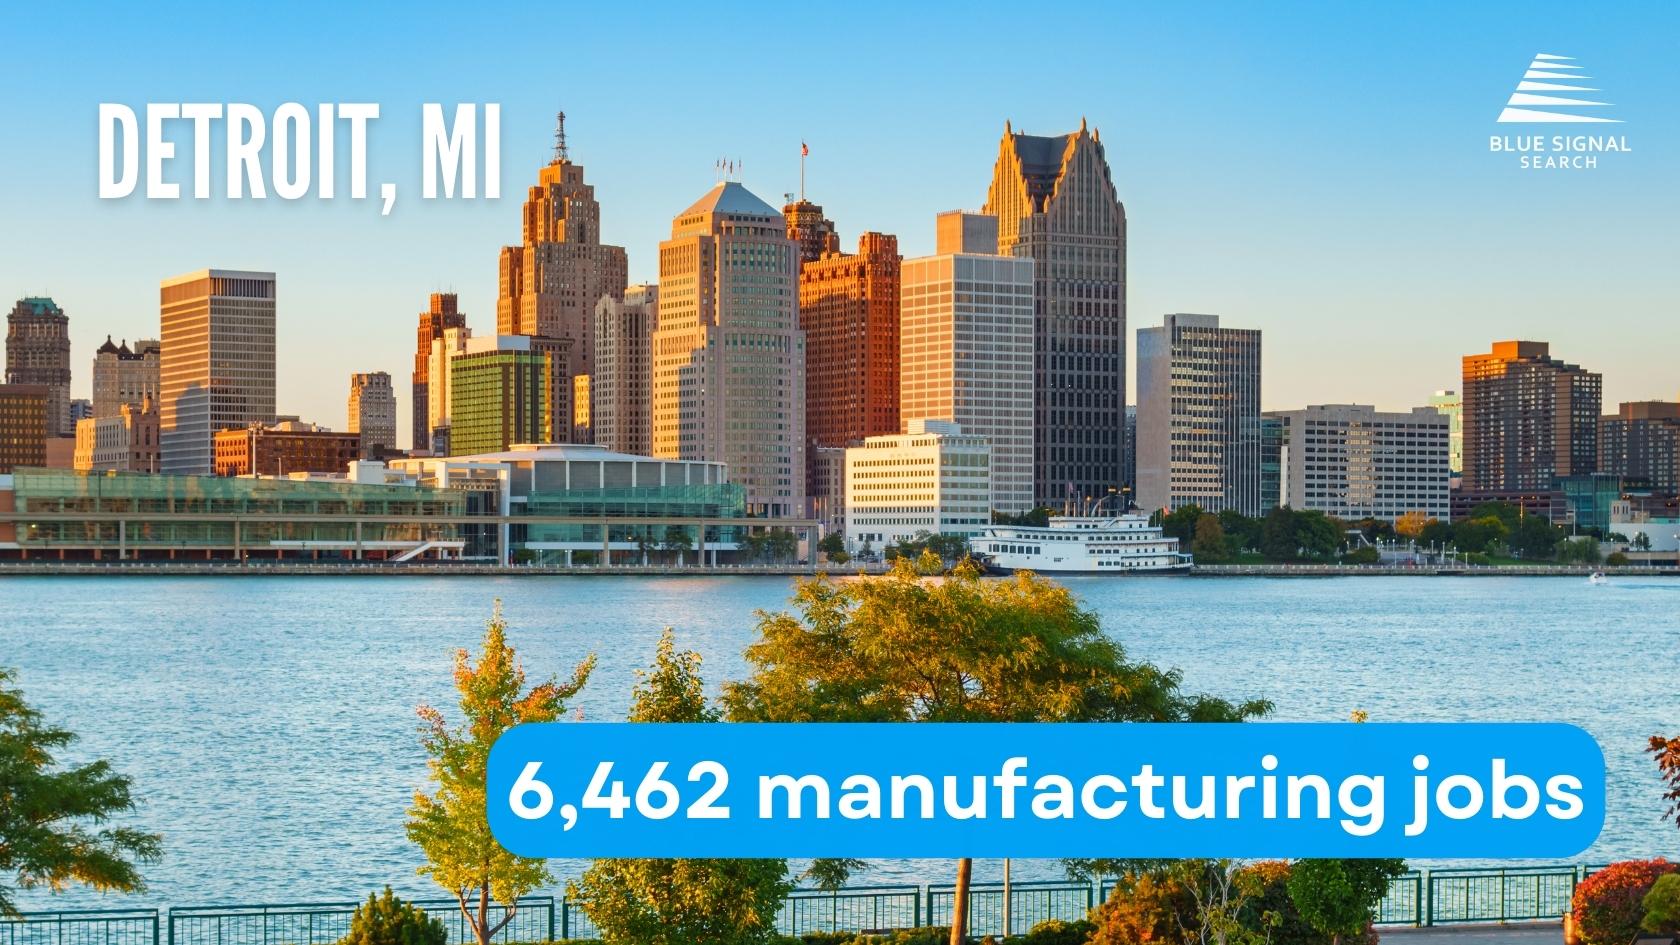 Skyline of Detroit, MI with key manufacturing statistics highlighted.